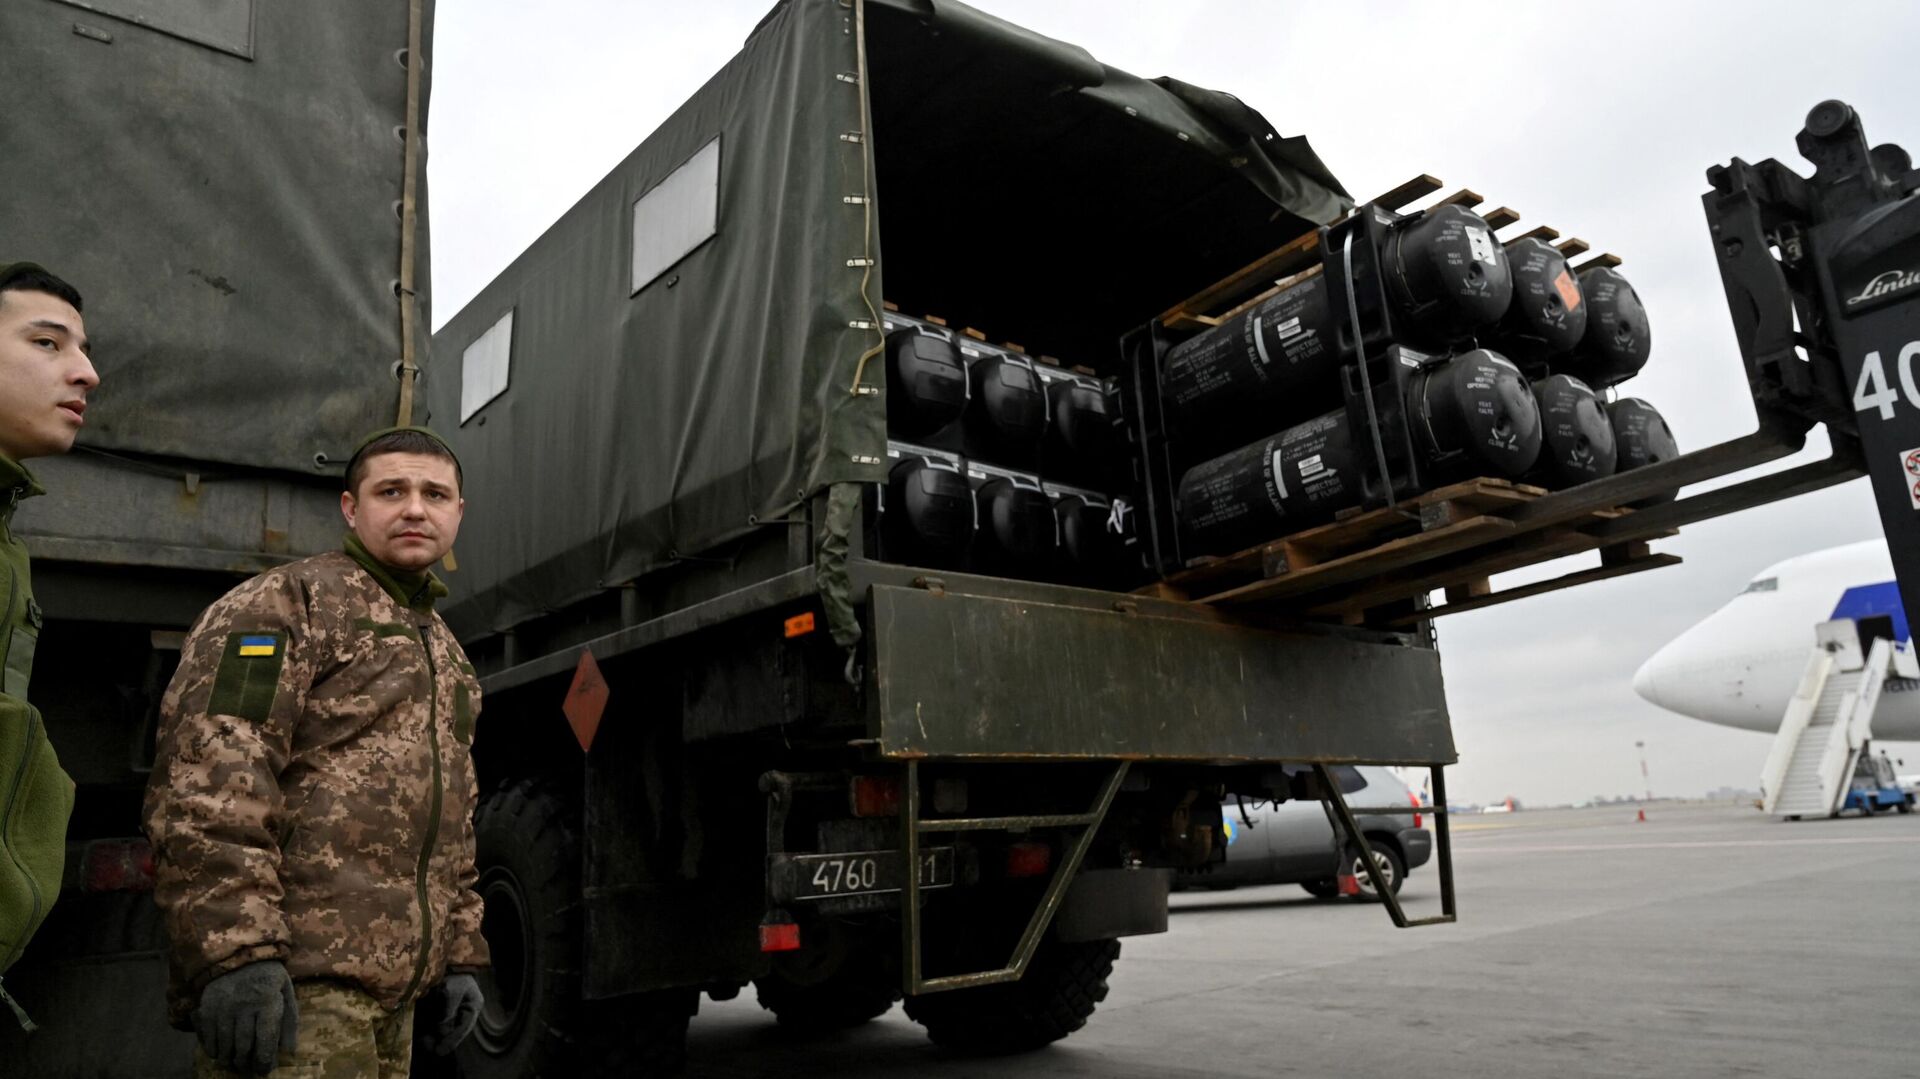 Ukrainian servicemen load a truck with the FGM-148 Javelin, American man-portable anti-tank missile provided by US to Ukraine as part of a military support, upon its delivery at Kiev's airport Borispol on February 11,2022 - Sputnik International, 1920, 15.11.2022